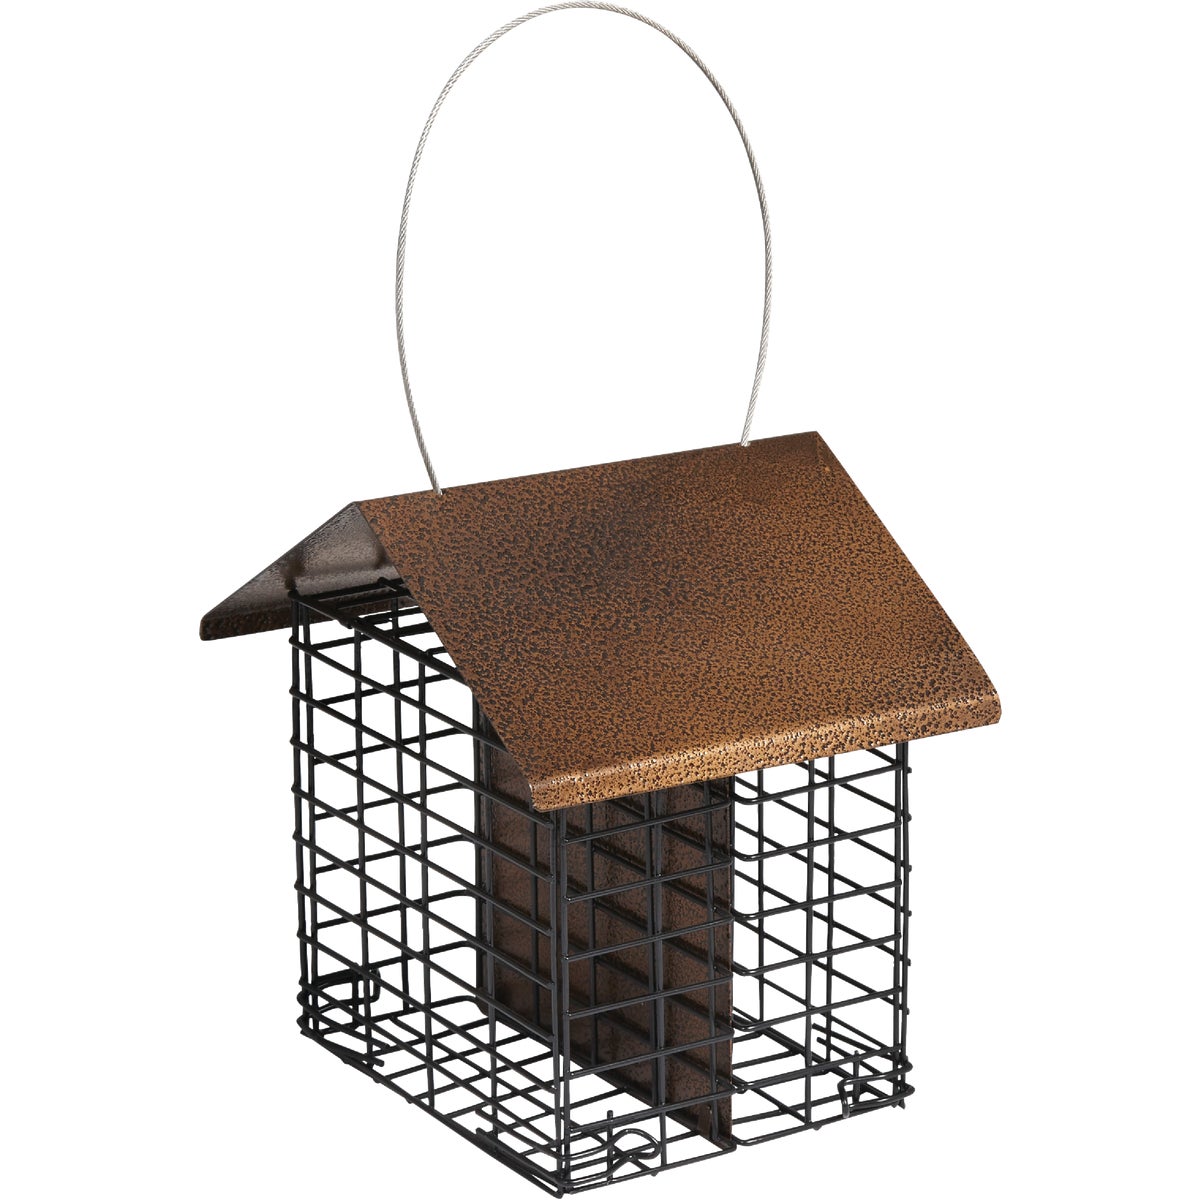 Item 705290, Double suet cake feeder is made of iron and wire with a stainless wire 